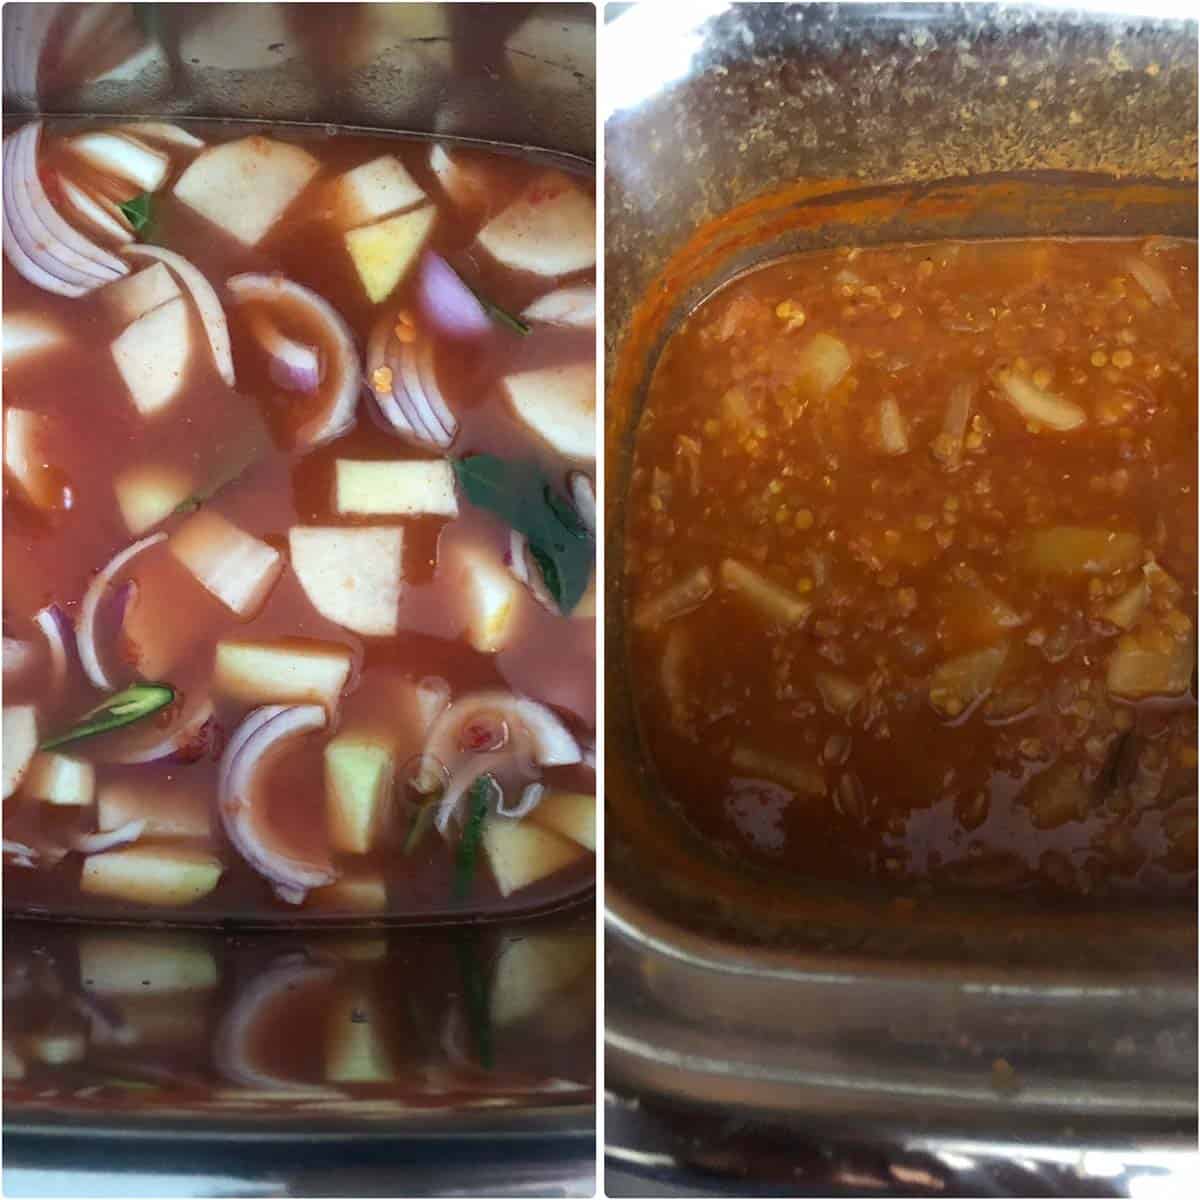 Before and after cooking the dish